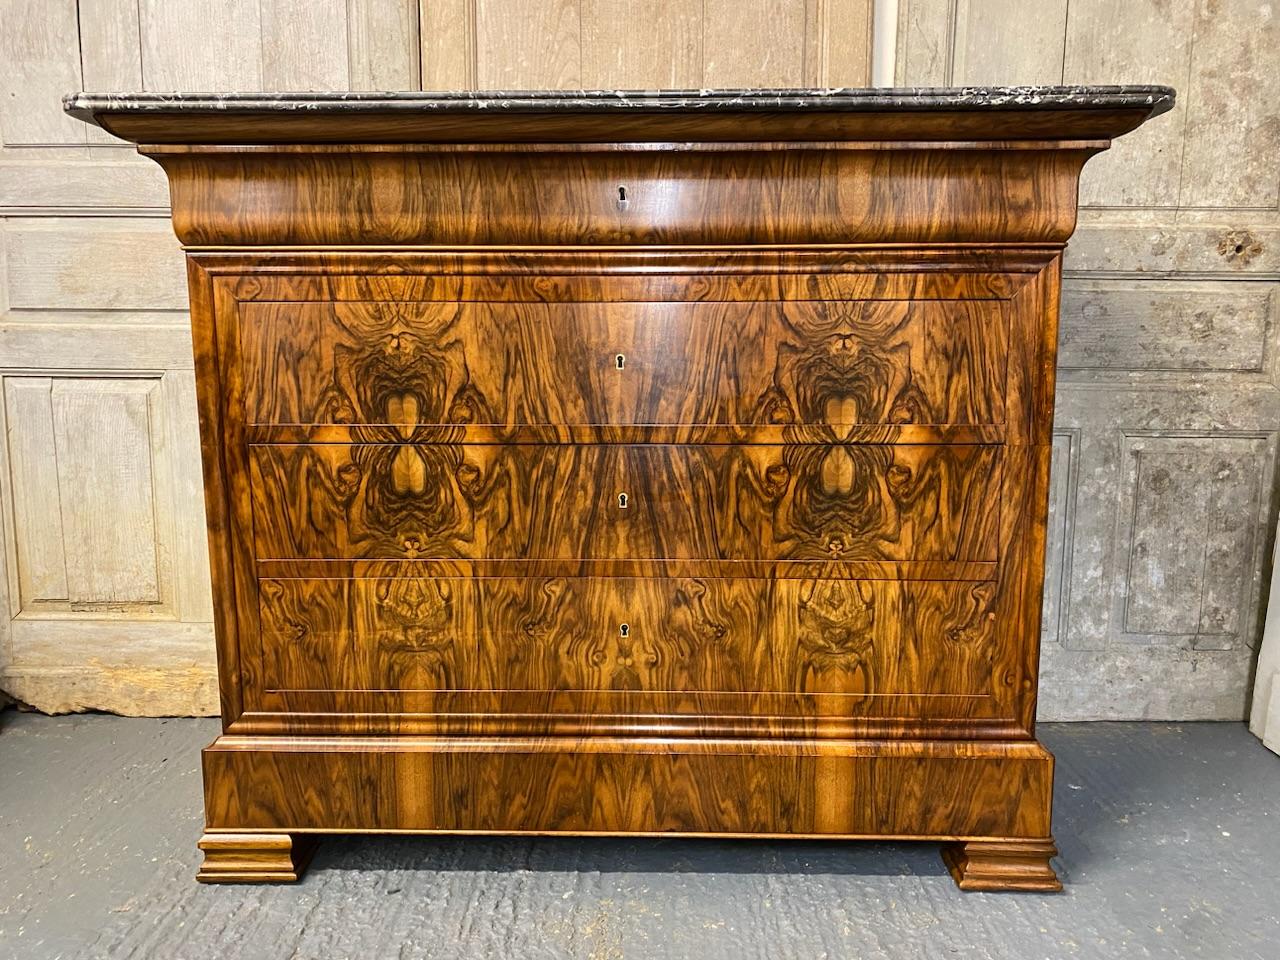 A stunning French marble top commode chest of drawers, made from walnut and excellent tight burr walnut to the front. The grey veined marble top is in excellent condition. The drawers all run smoothly and it has the rare extra secret drawer in the